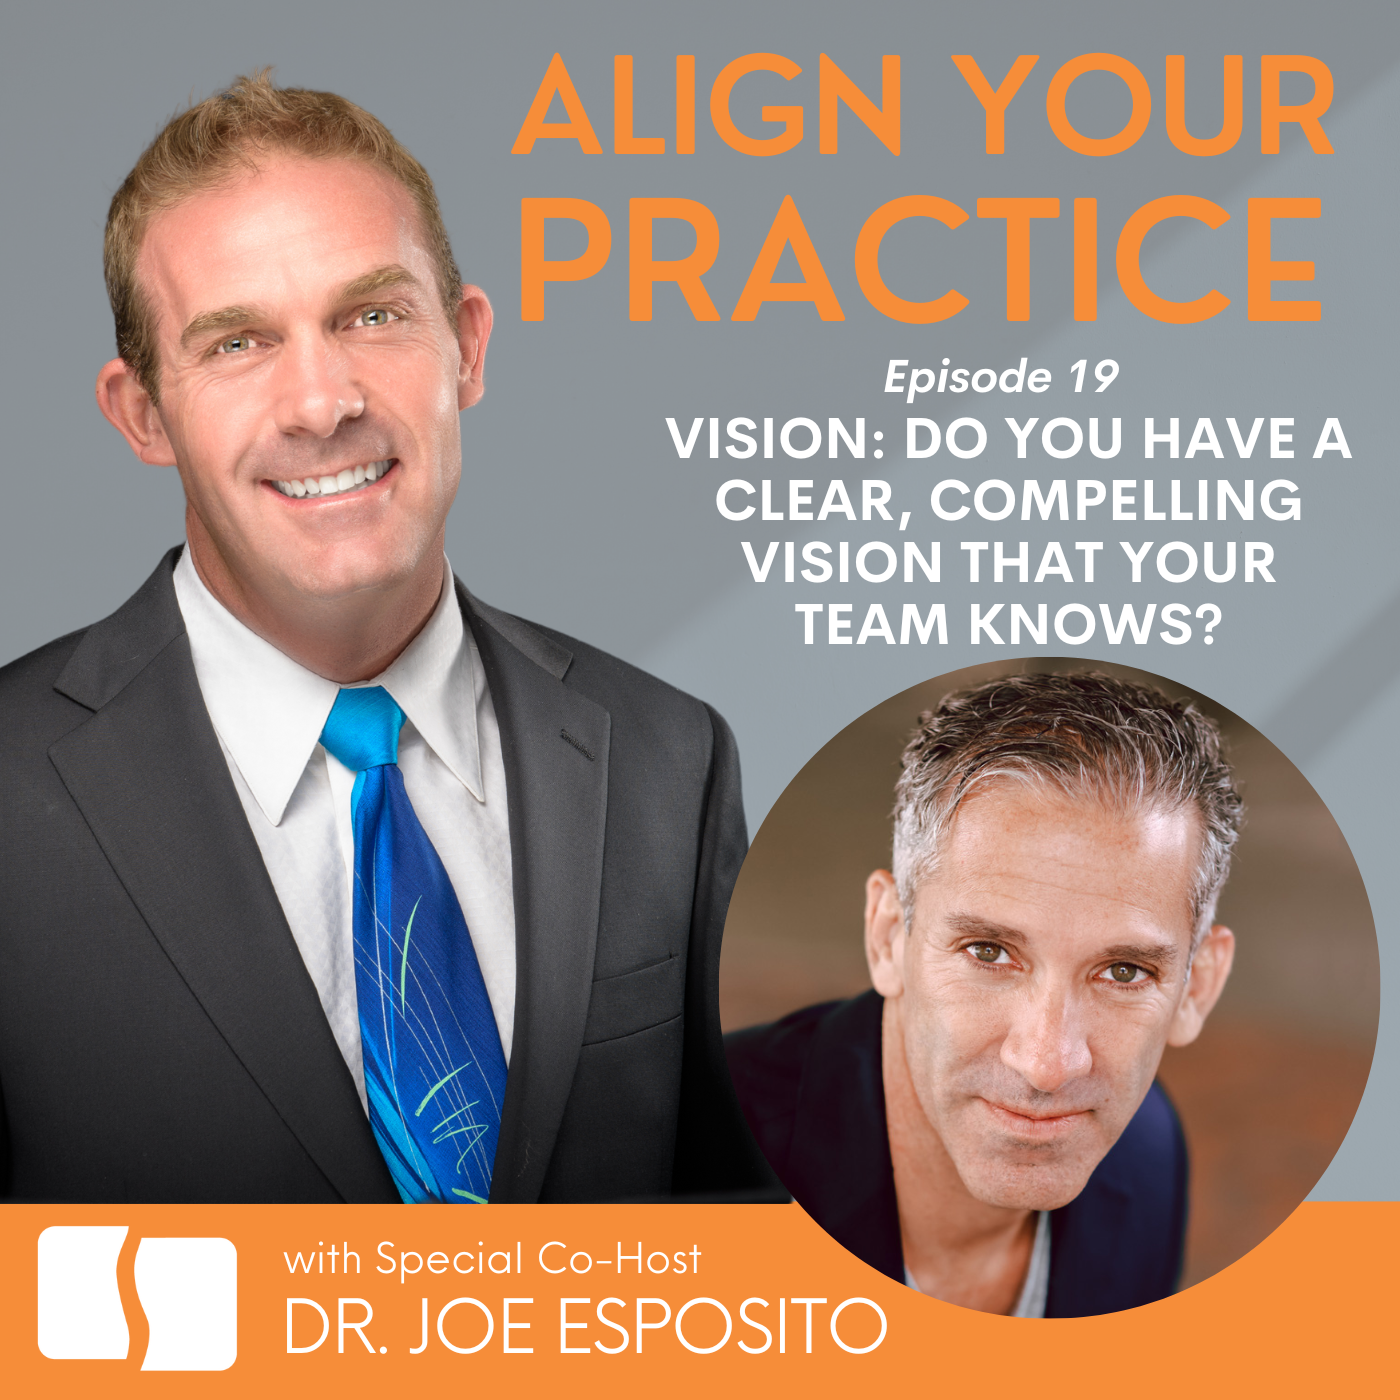 Vision: Do You Have a Clear, Compelling Vision that Your Team Knows?